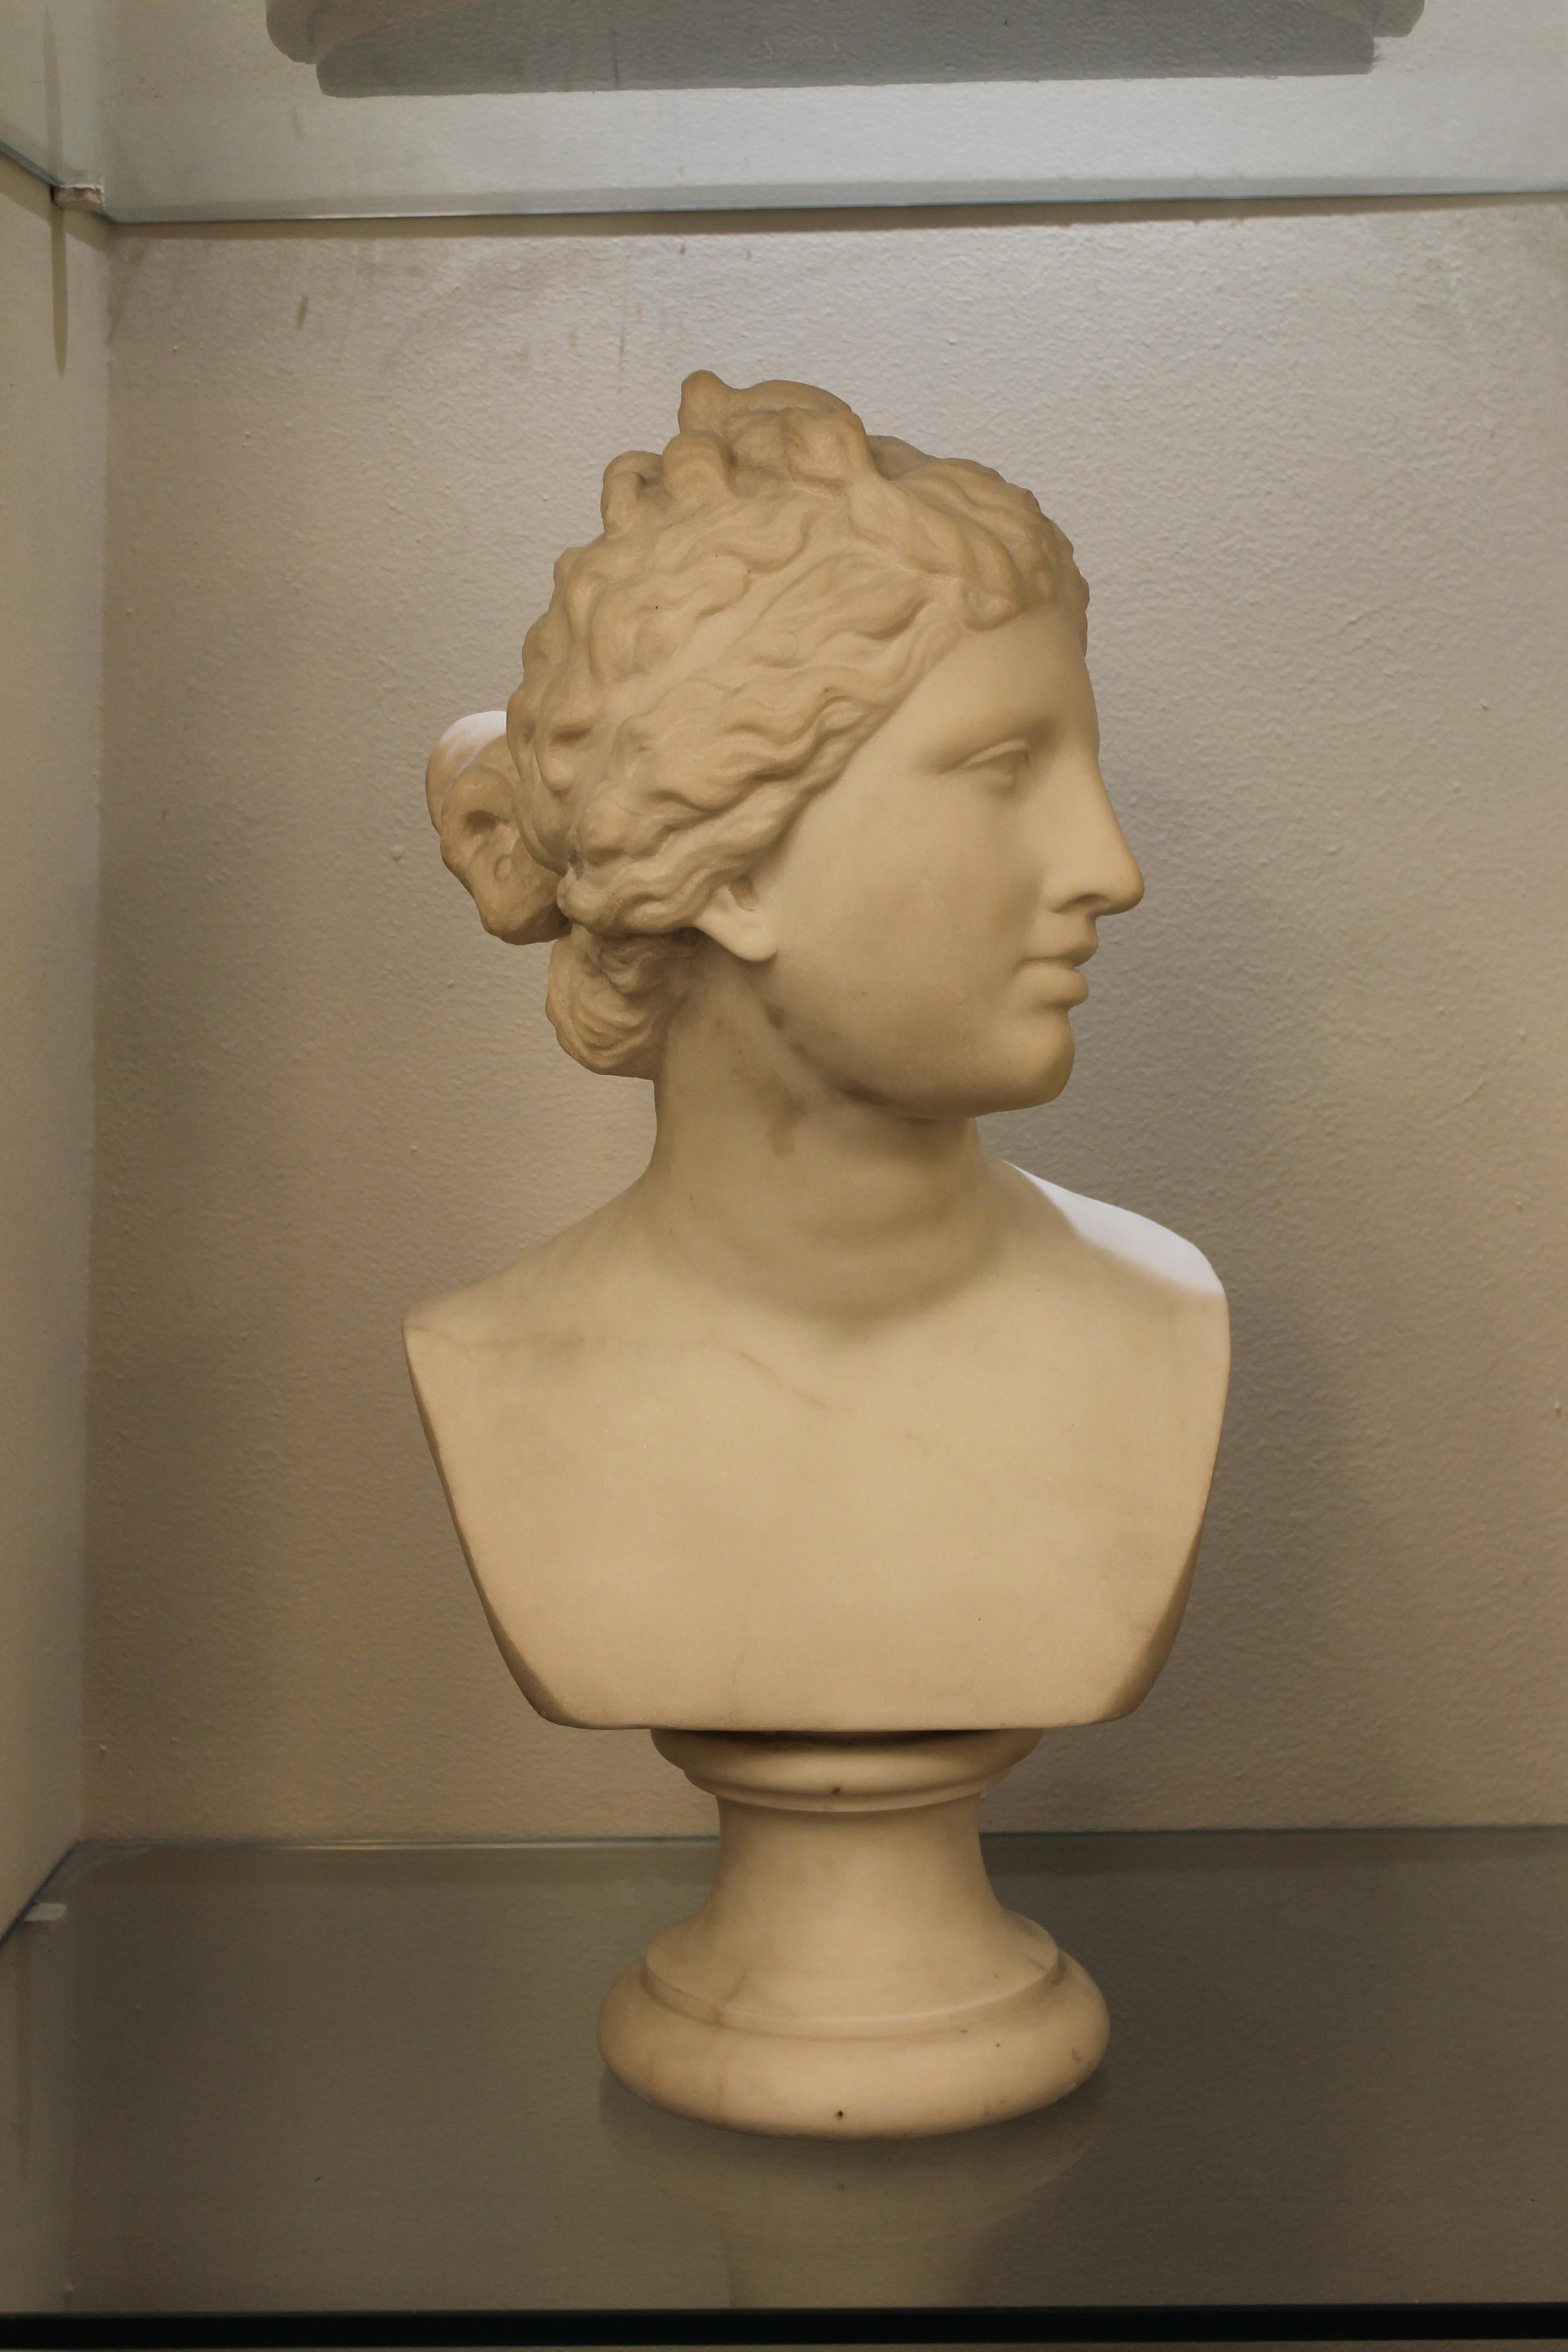 Carved White Marble Bust De Carrare, 19th, Signed Girard